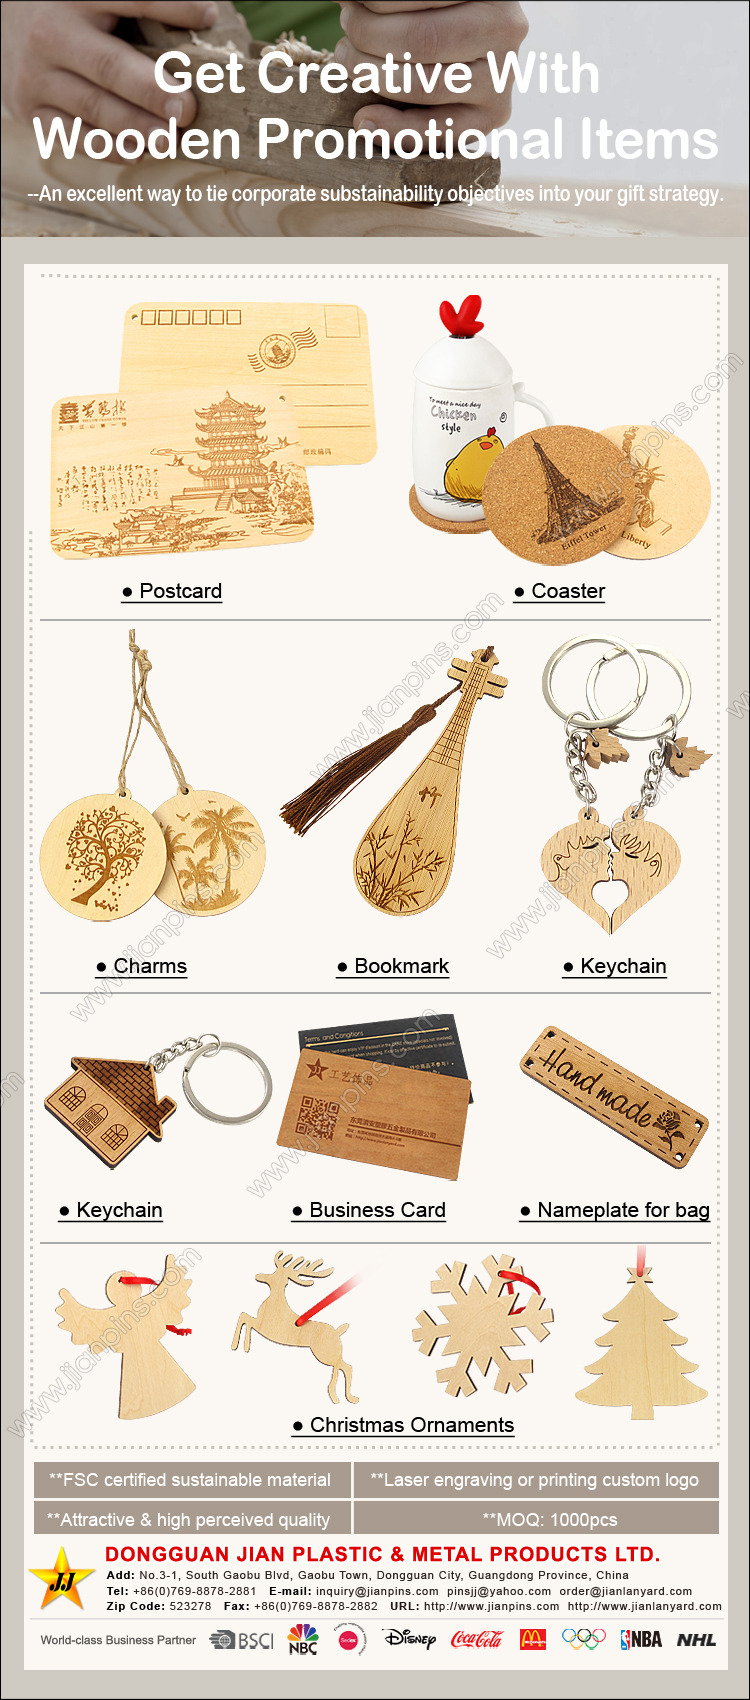  FSC certified hand-crafted Wooden Promotional Items 